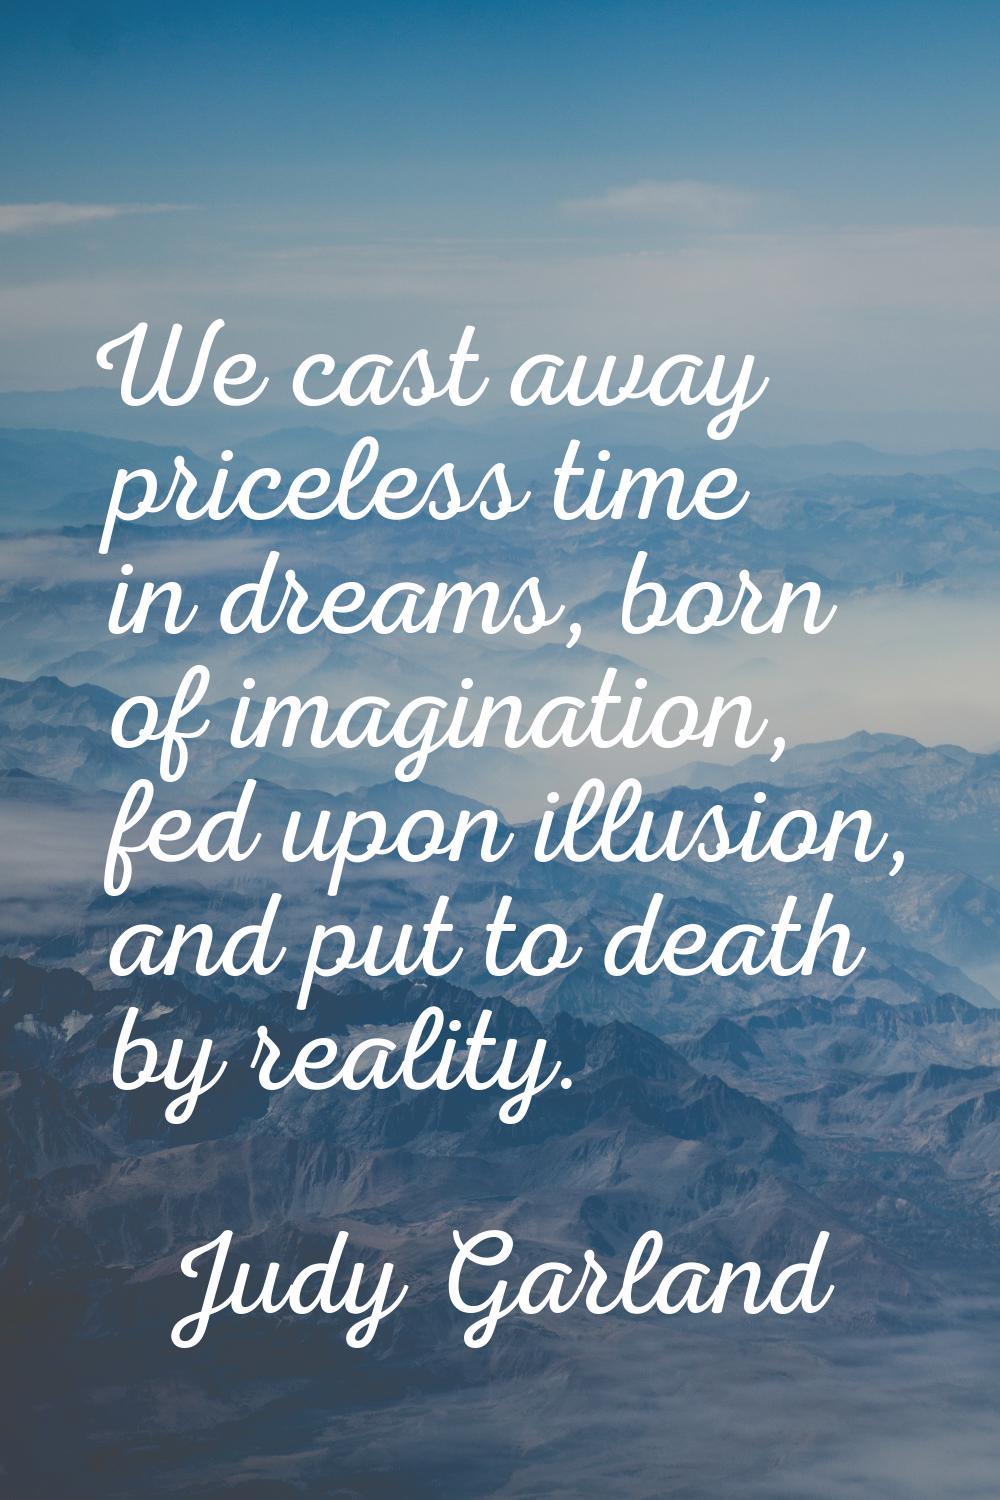 We cast away priceless time in dreams, born of imagination, fed upon illusion, and put to death by 